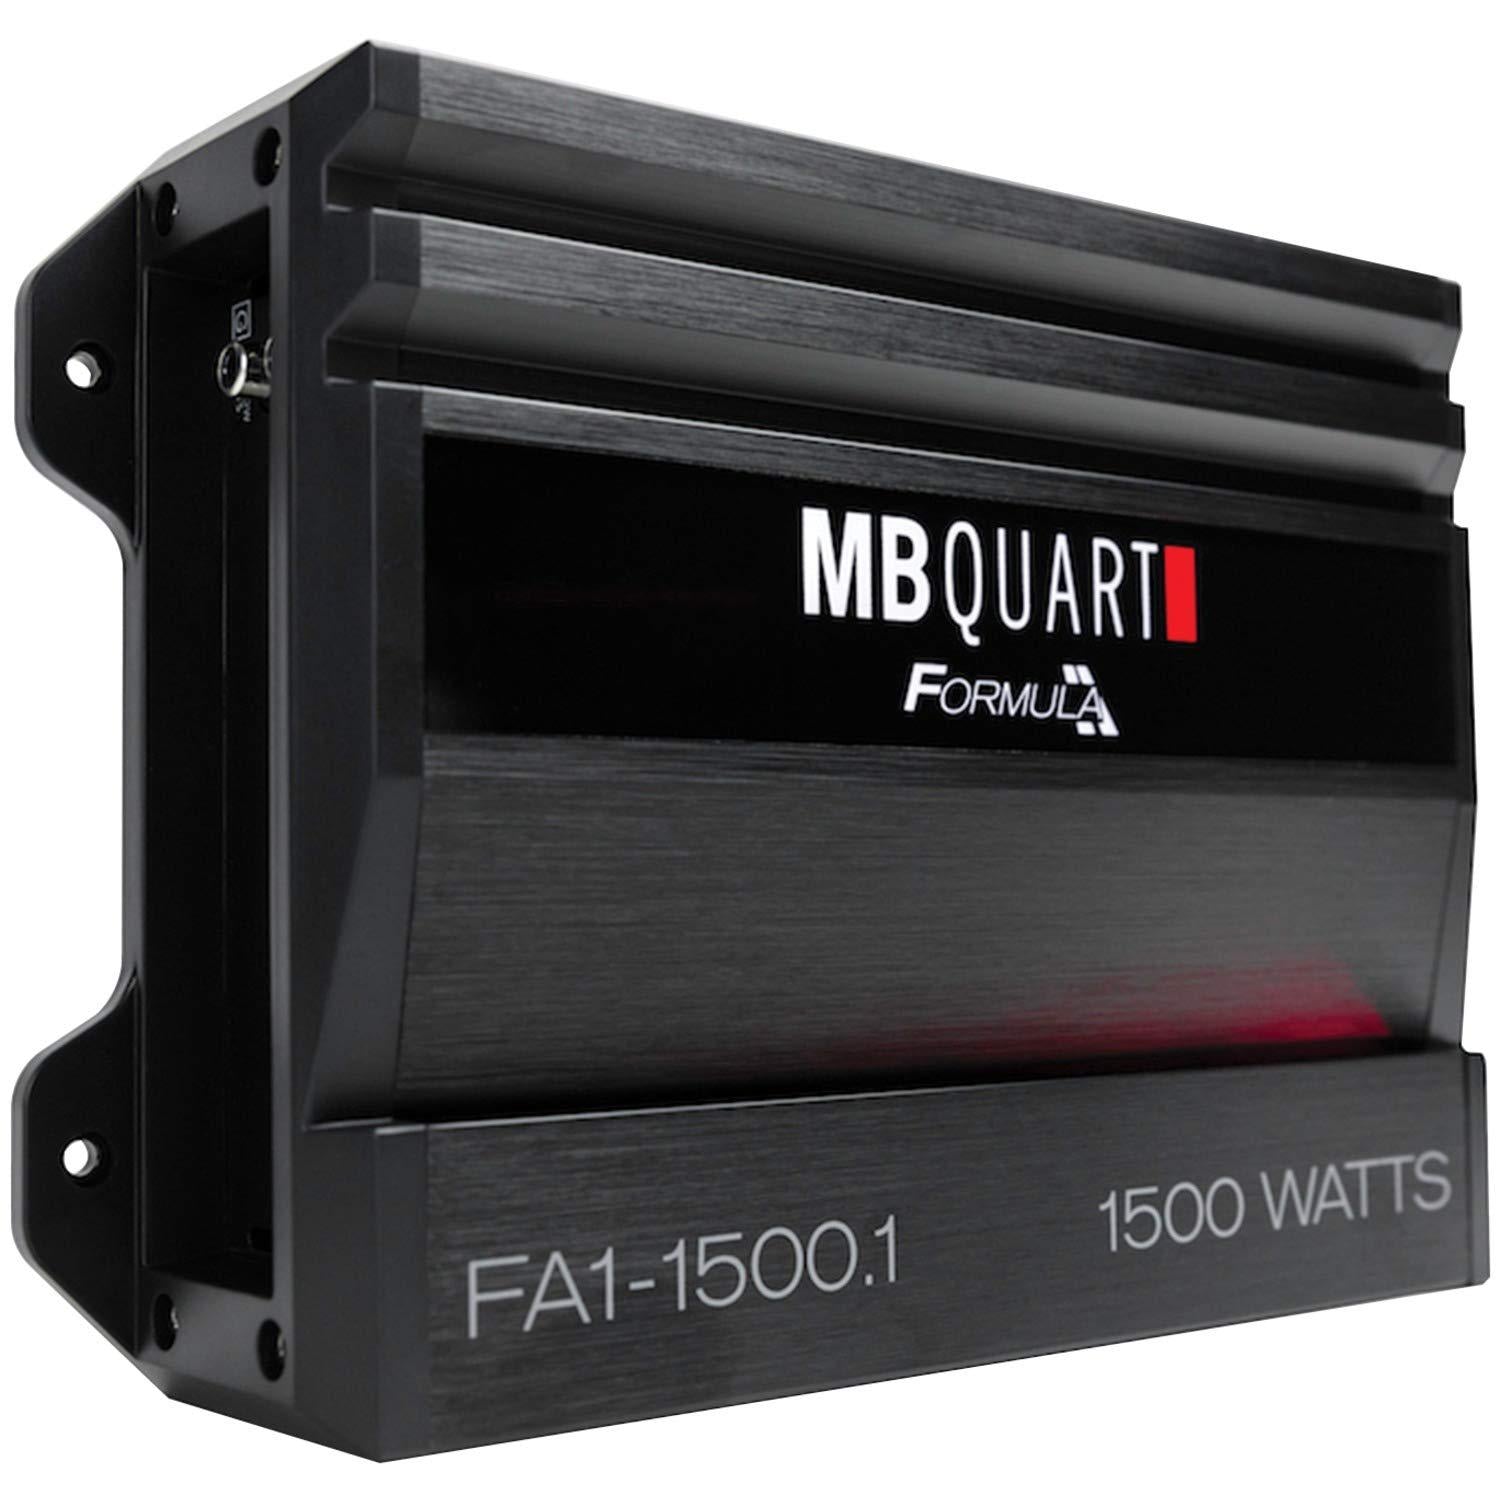 MB Quart, MB Quart FA1-1500.1 Mono Channel Car Audio Amplifier (Black) - Class SQ Amp, 1500-Watt, 1 Ohm Stable, Variable Electronic Crossover, LED System Protection, Heavy Duty Connections, Bass Remote Included